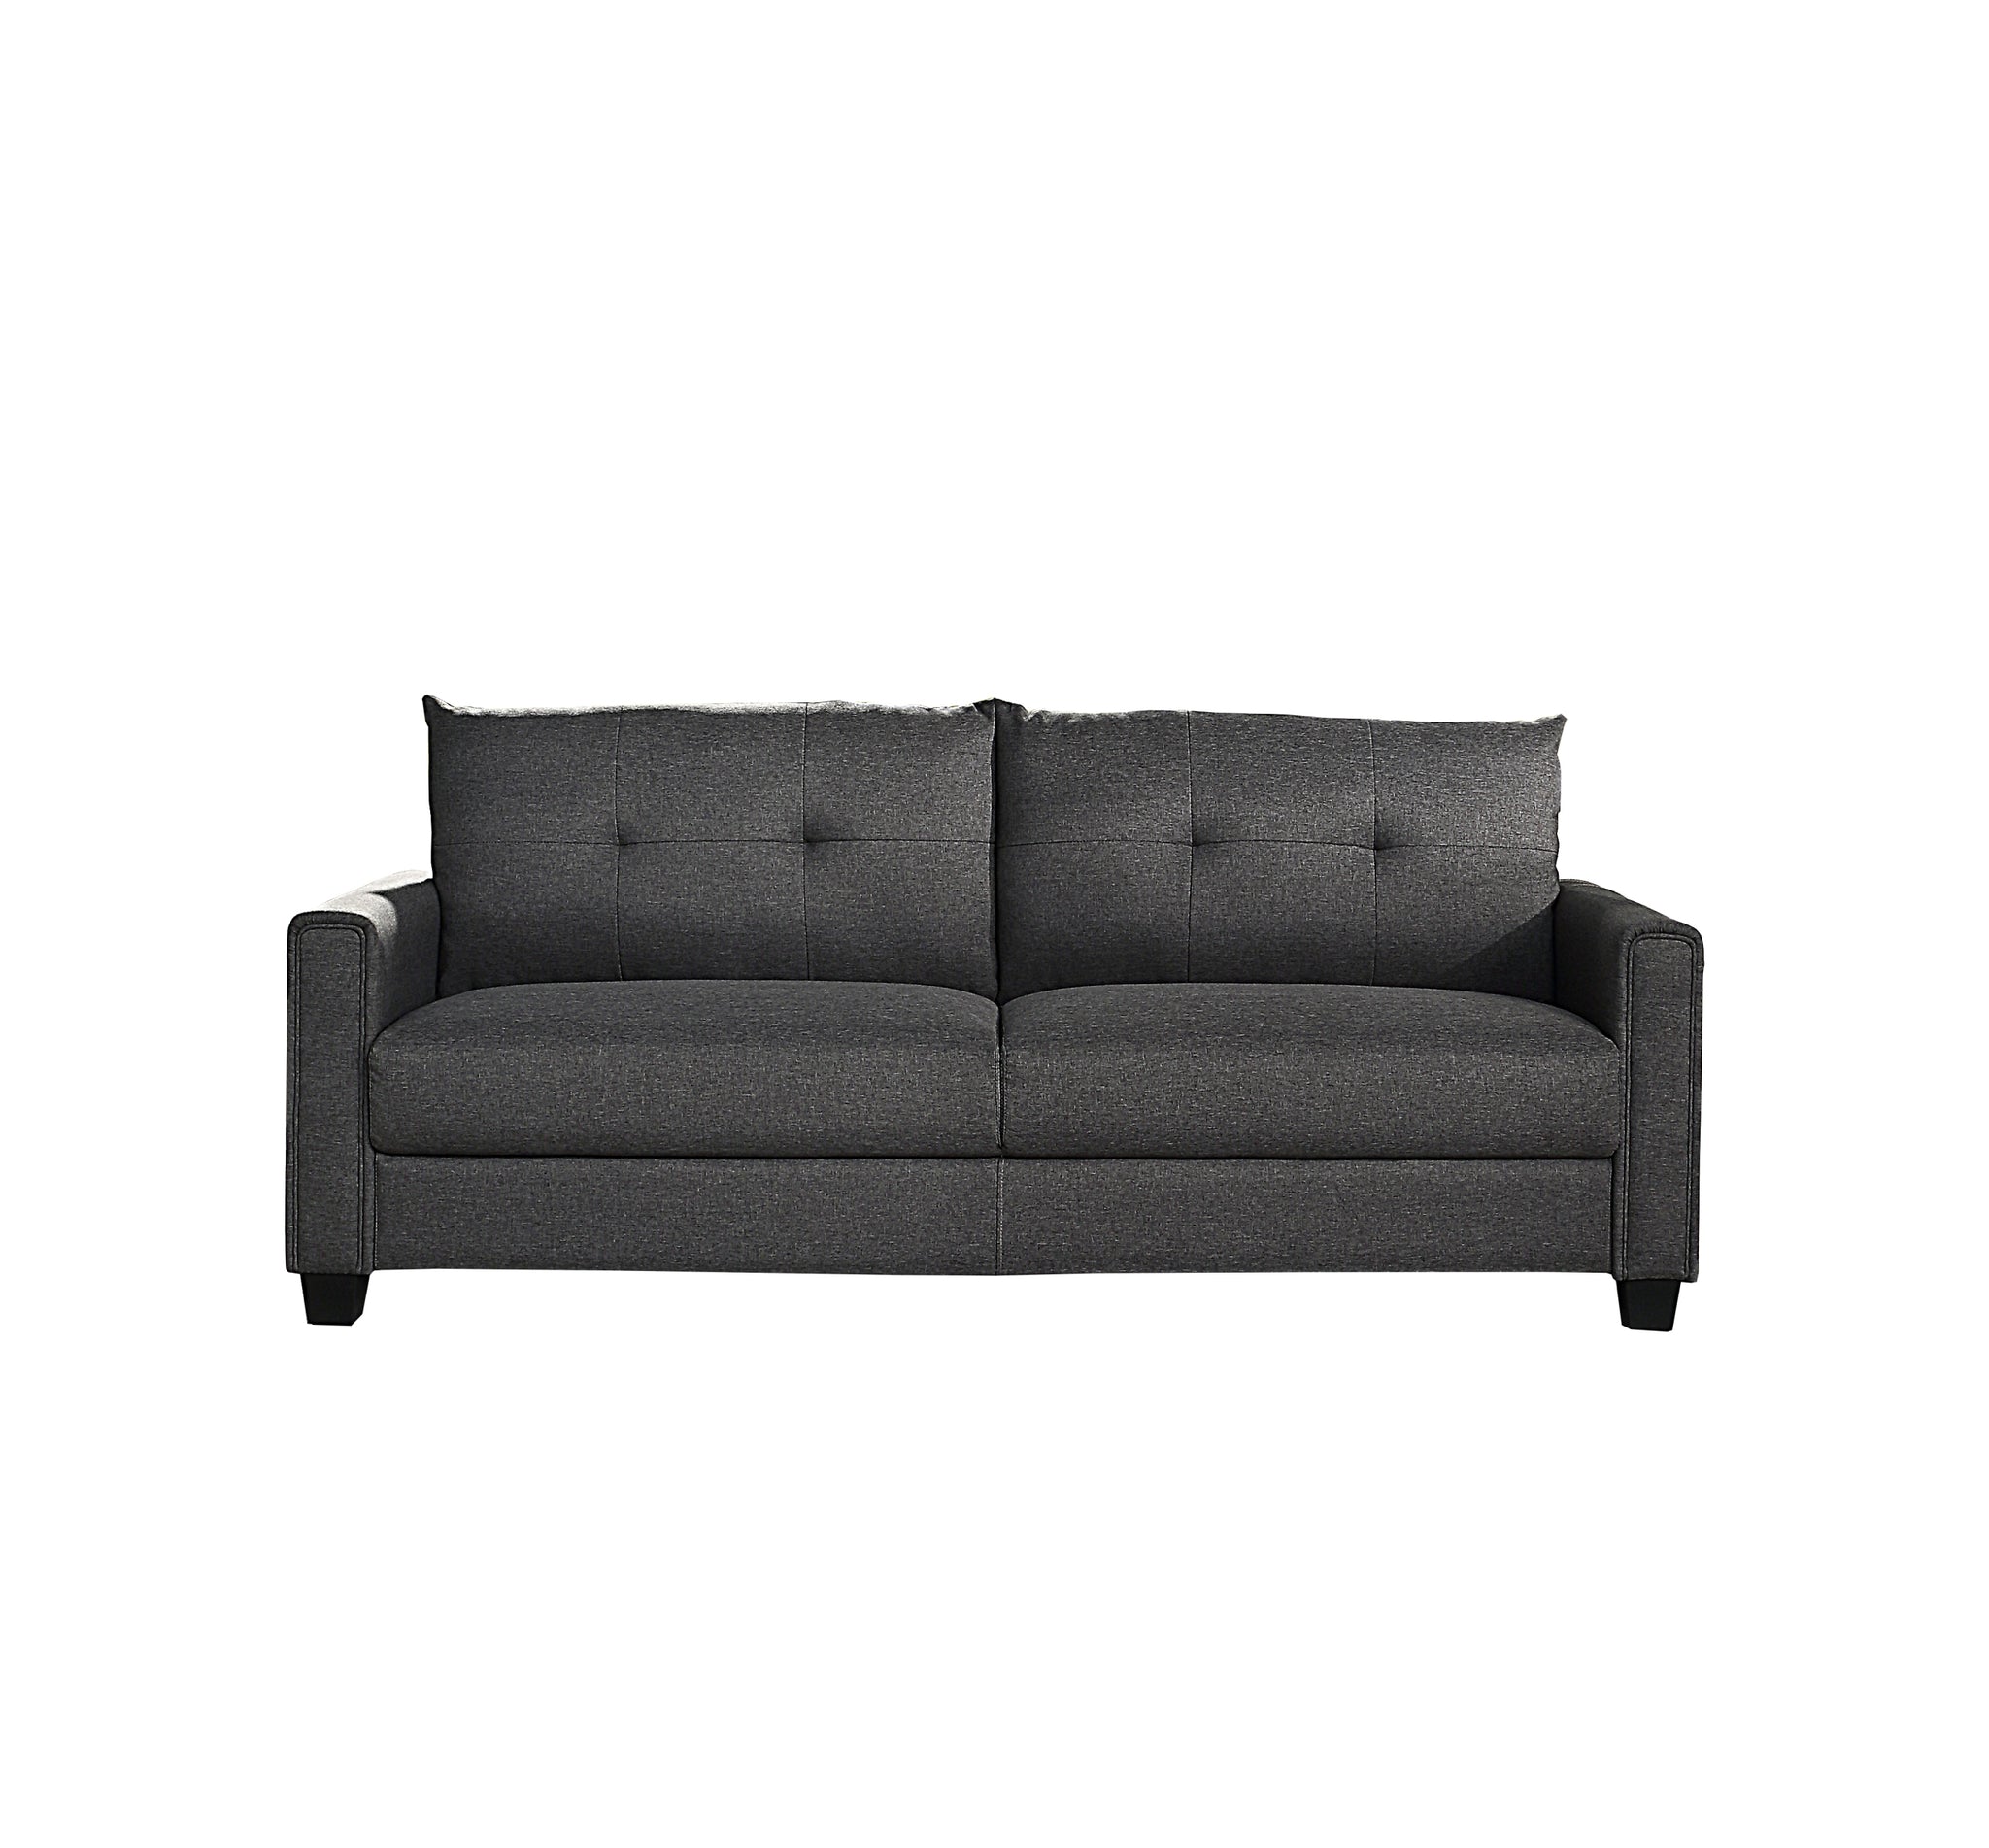 Linen Fabric Upholstery sofa Tufted Cushions Easy dark grey-wood-primary living space-soft-american